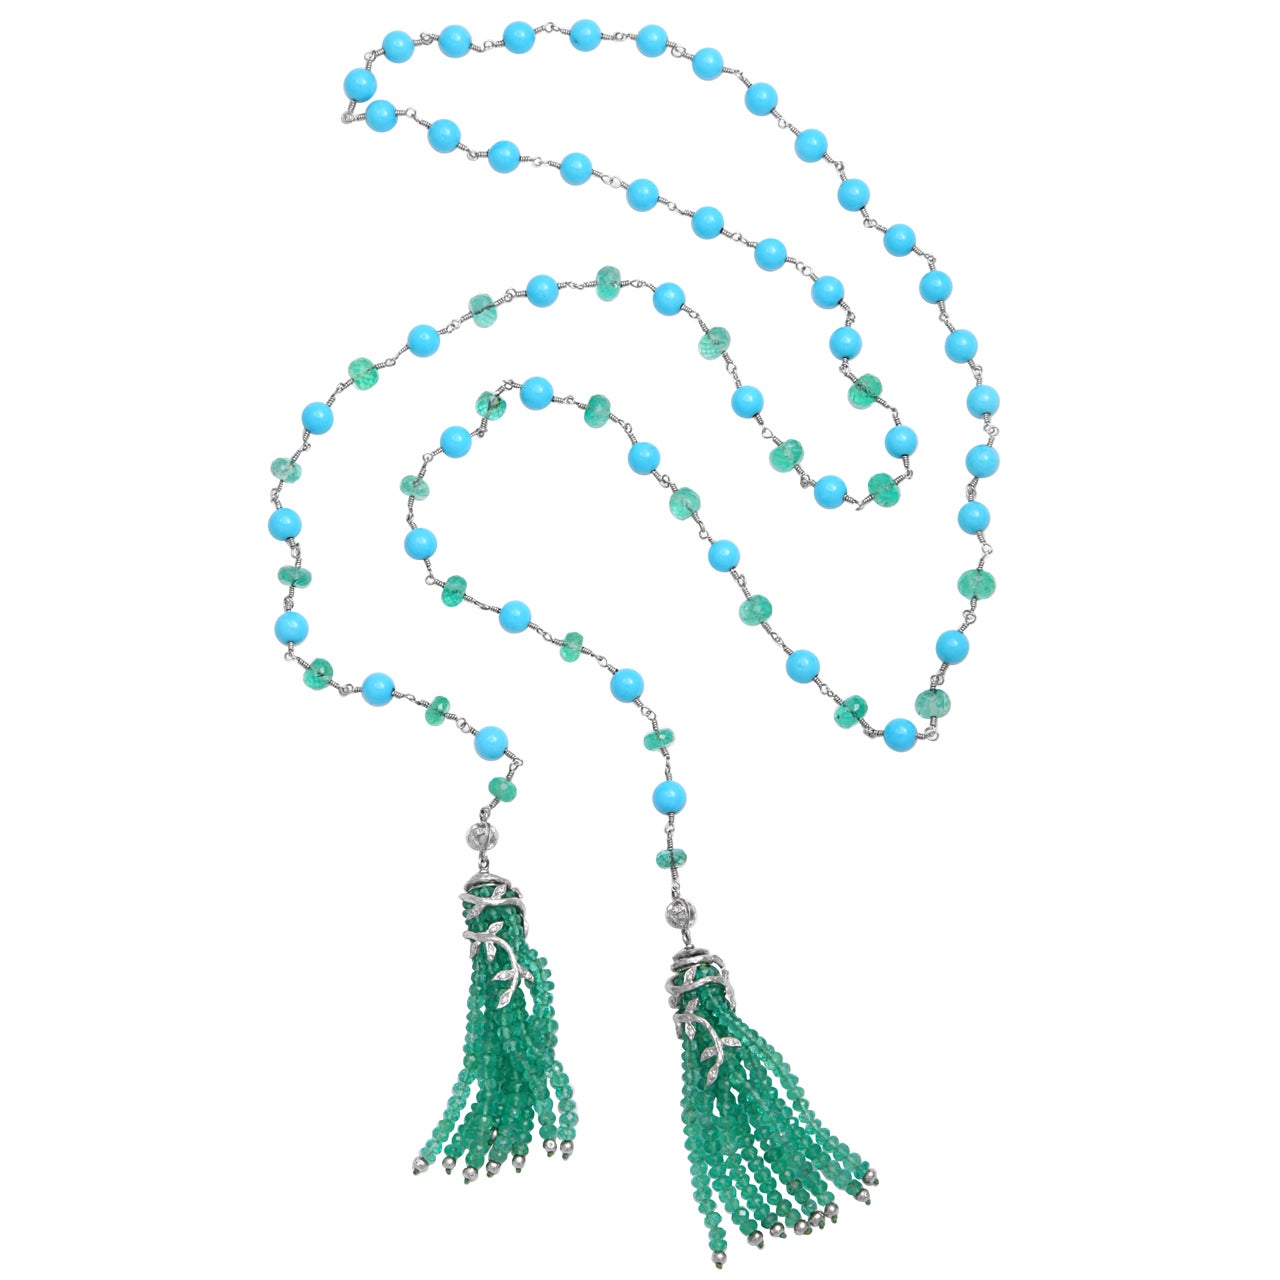 Cathy Waterman Emerald & Turquoise Tassel Necklace